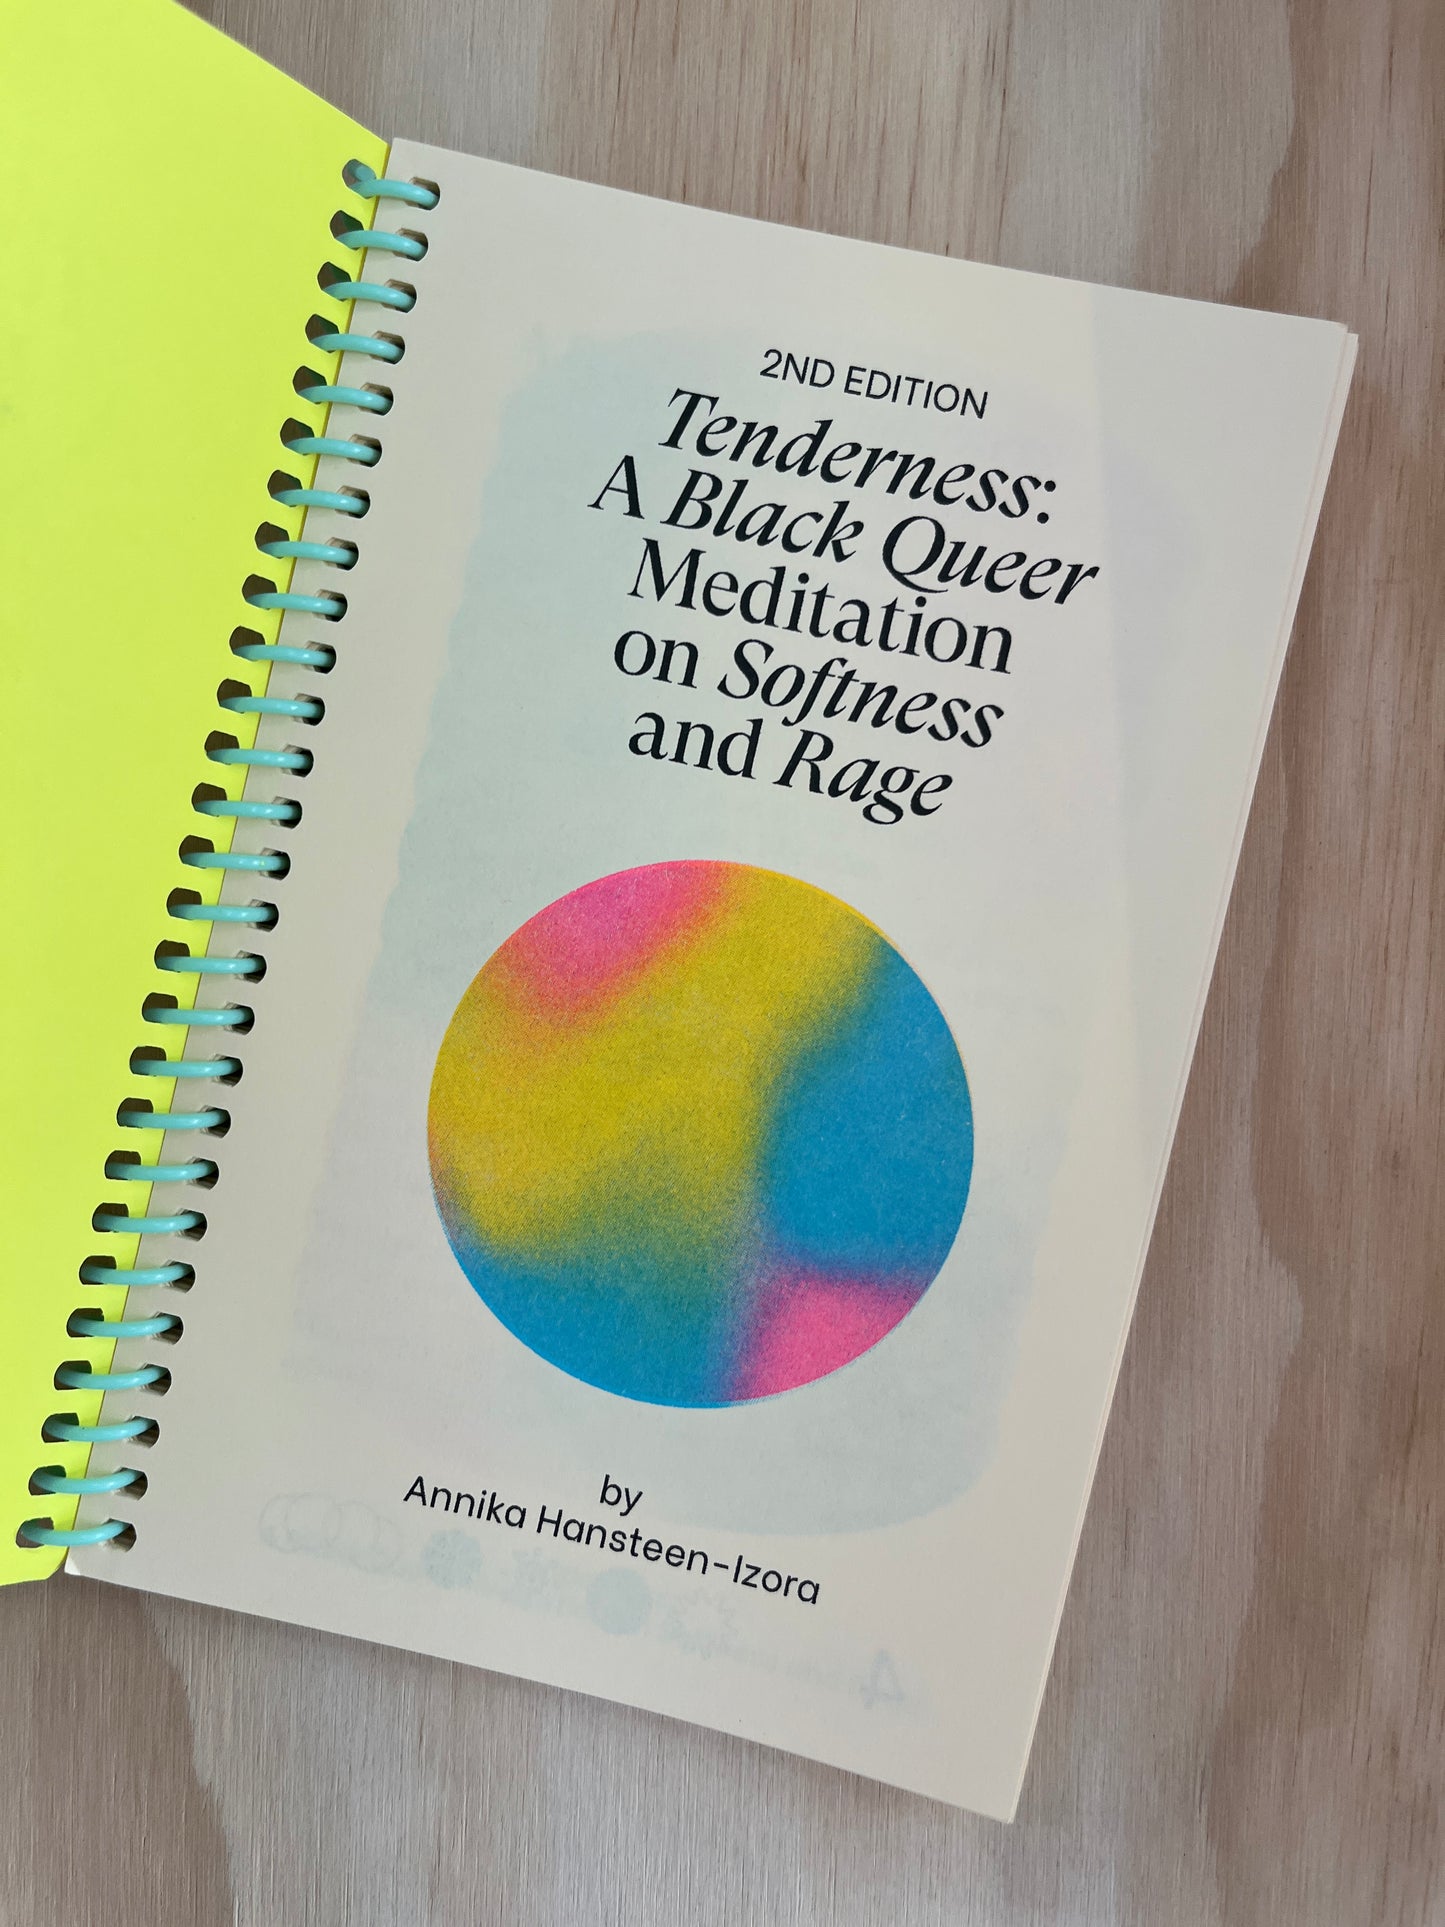 TENDERNESS: A BLACK QUEER MEDITATION ON SOFTNESS AND RAGE (SECOND EDITION)